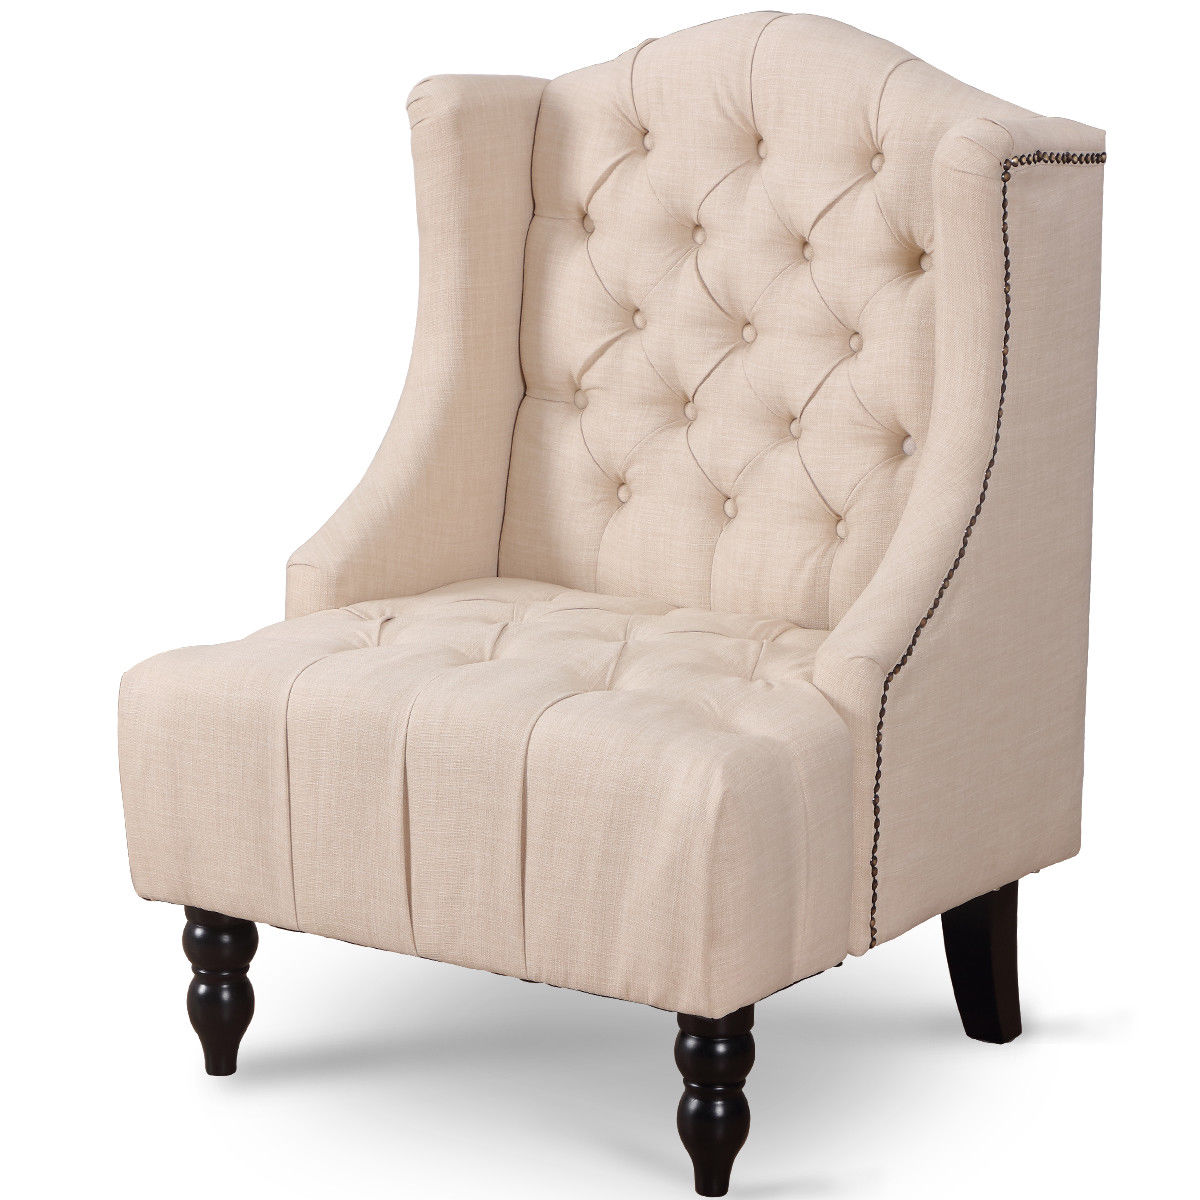 Gymax Wingback Tufted Accent Chair Fabric Nailhead Vintage Armchair